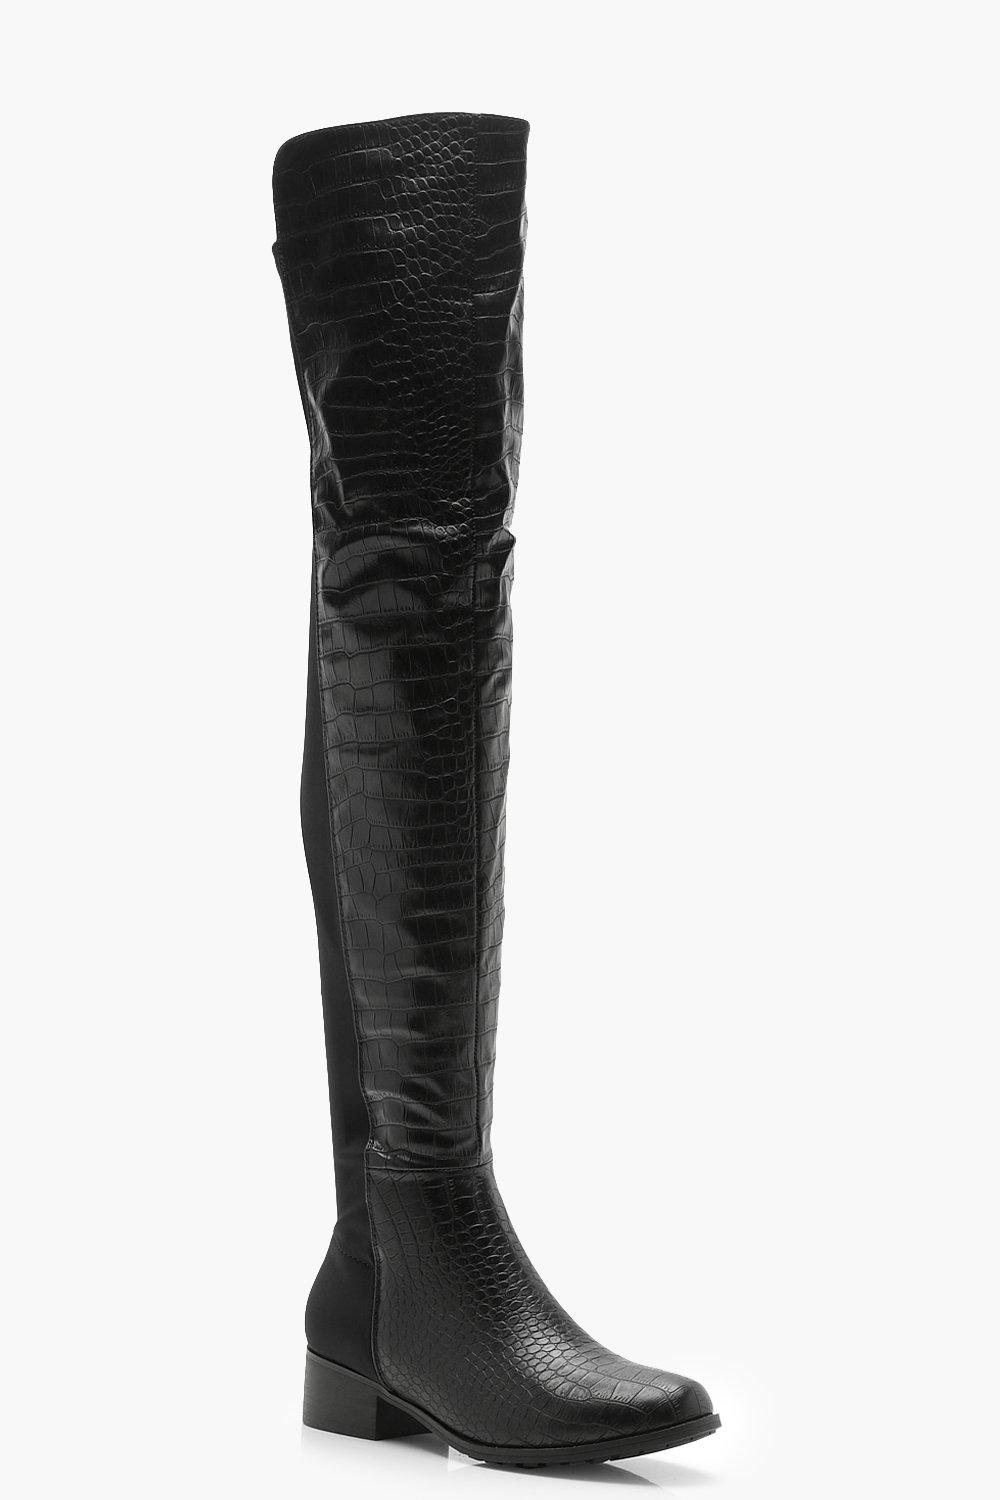 croc over the knee boots